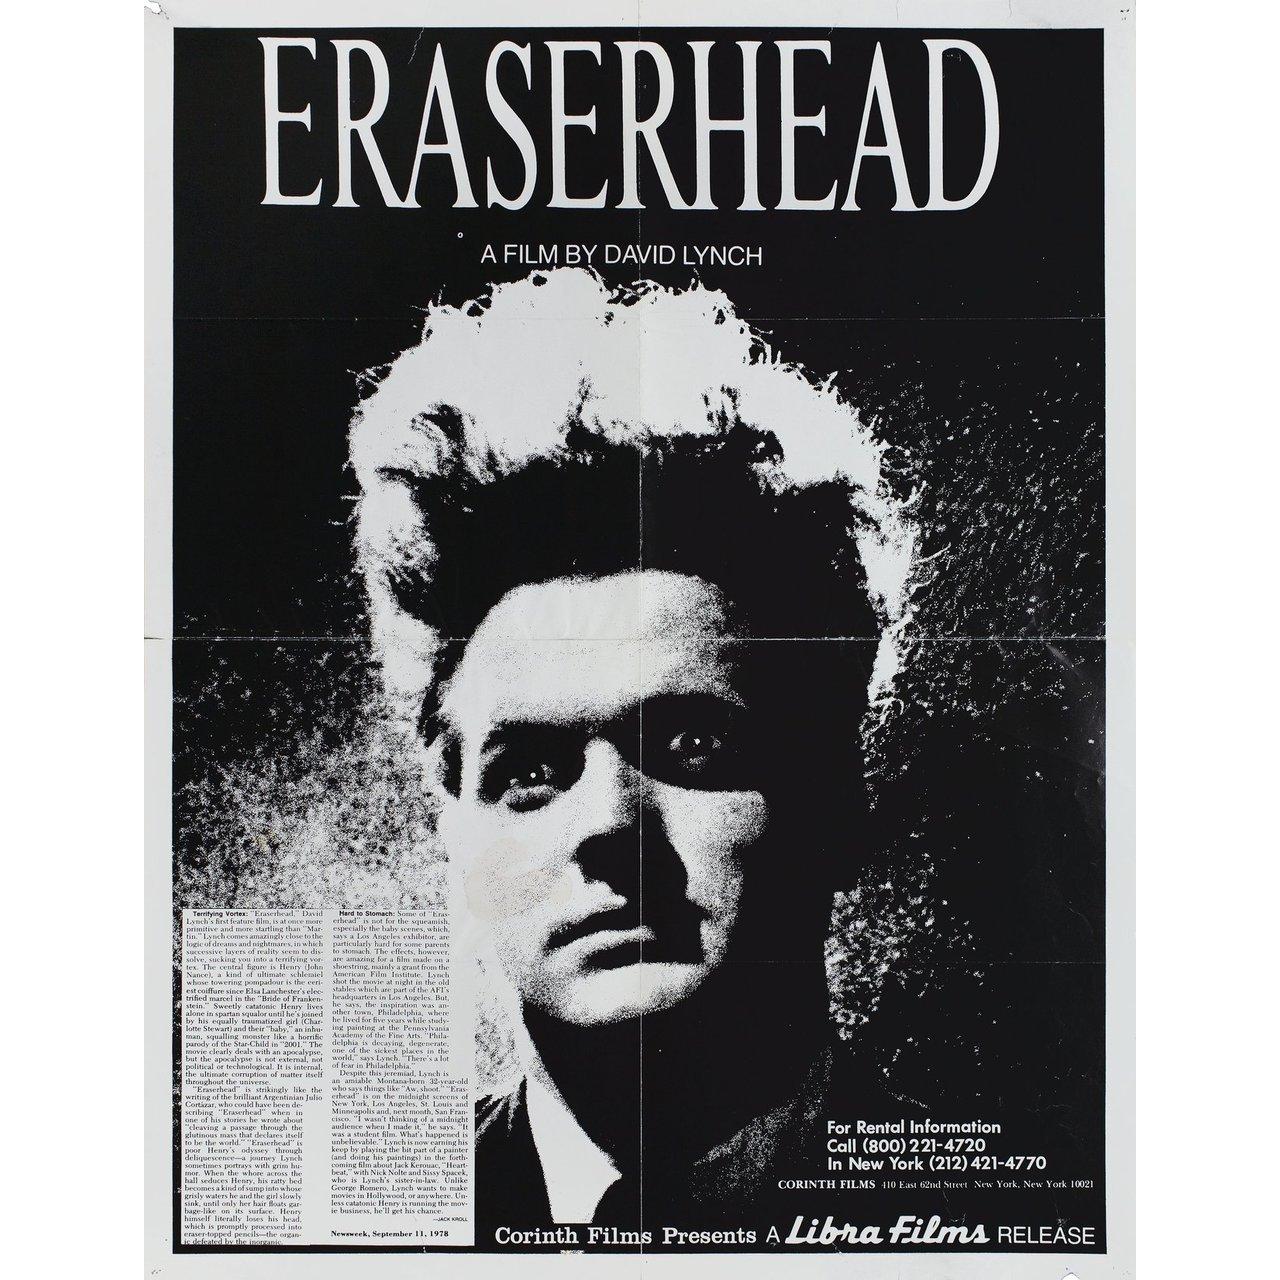 Original 1978 re-release U.S. mini poster for the film Eraserhead directed by David Lynch with Jack Nance / Charlotte Stewart / Allen Joseph / Jeanne Bates. Good-Very Good condition, folded with edge tears & stain. Many original posters were issued